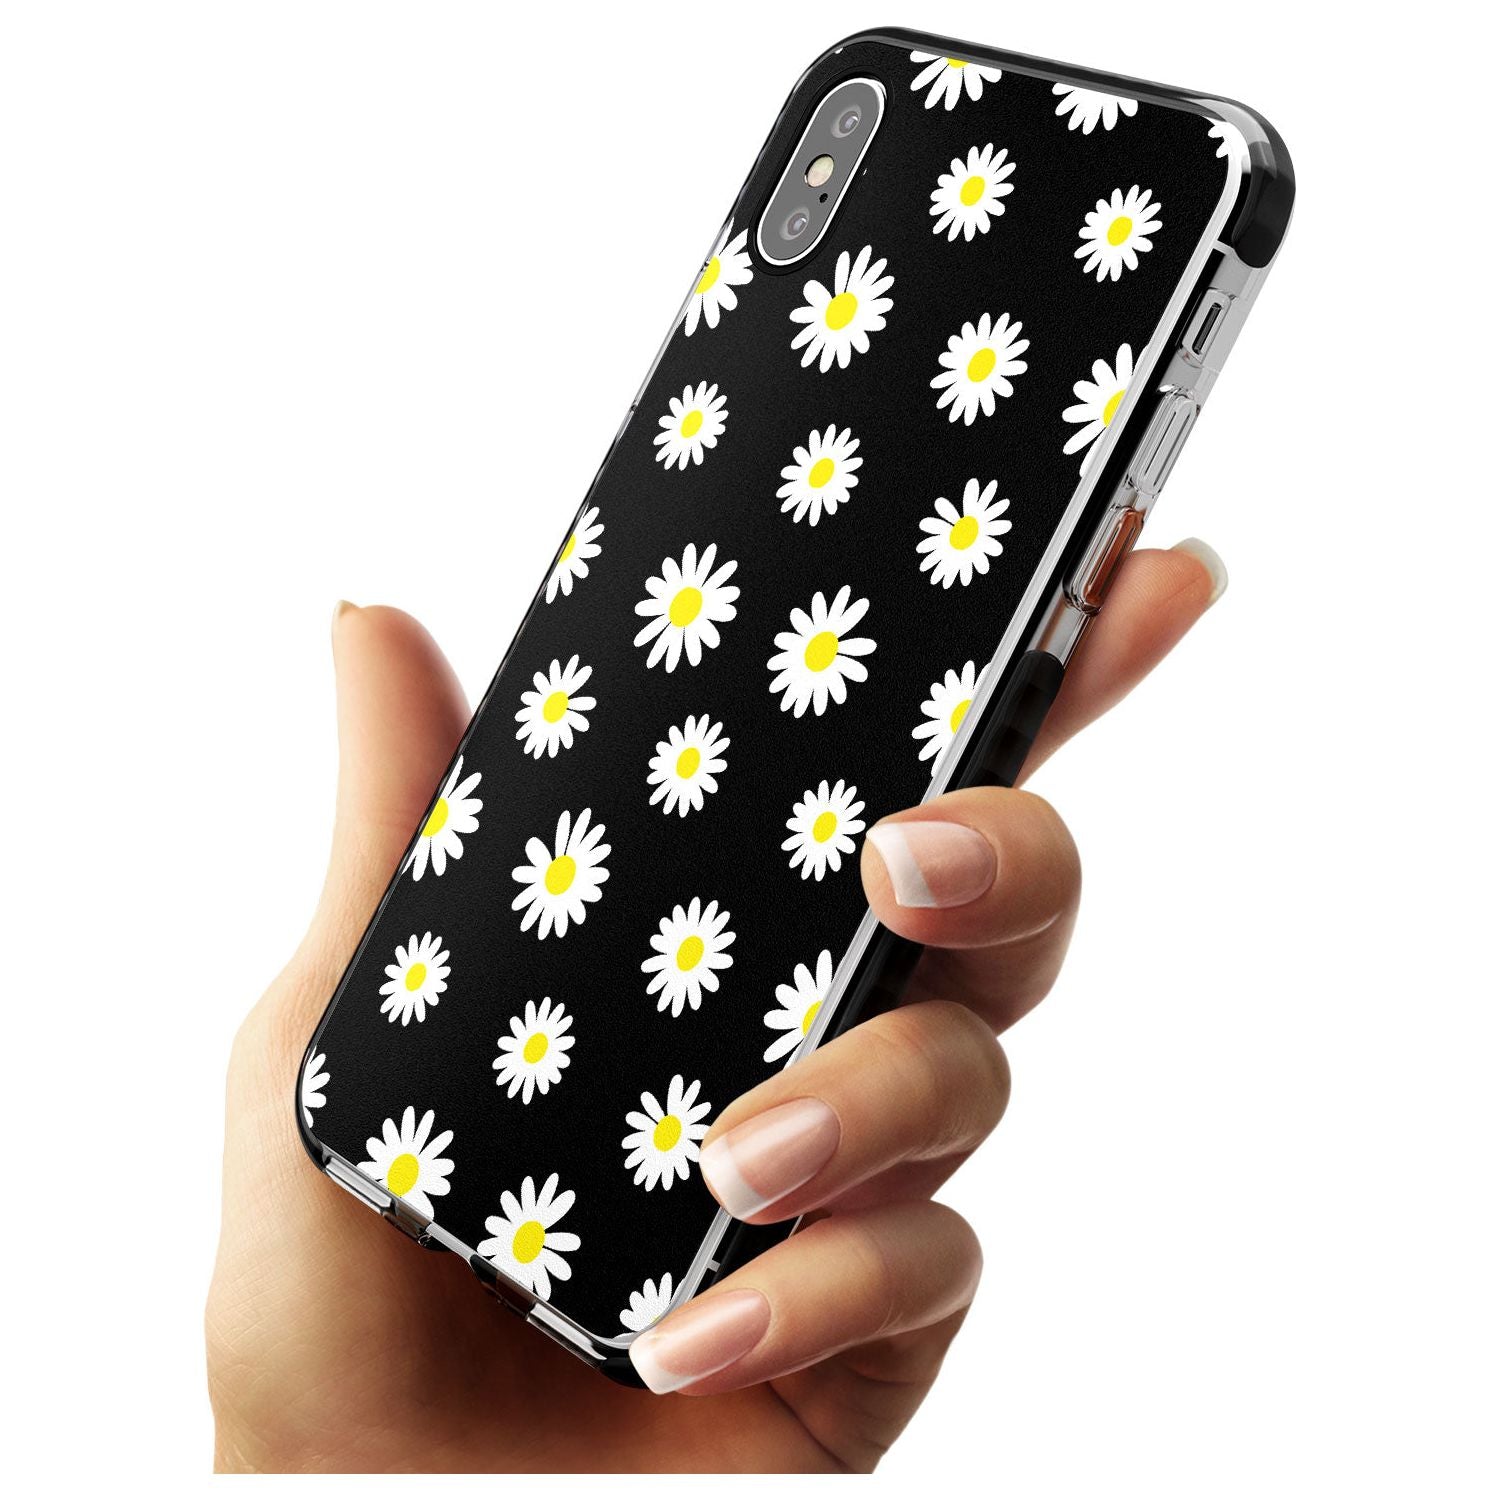 White Daisy Pattern (Black) Black Impact Phone Case for iPhone X XS Max XR